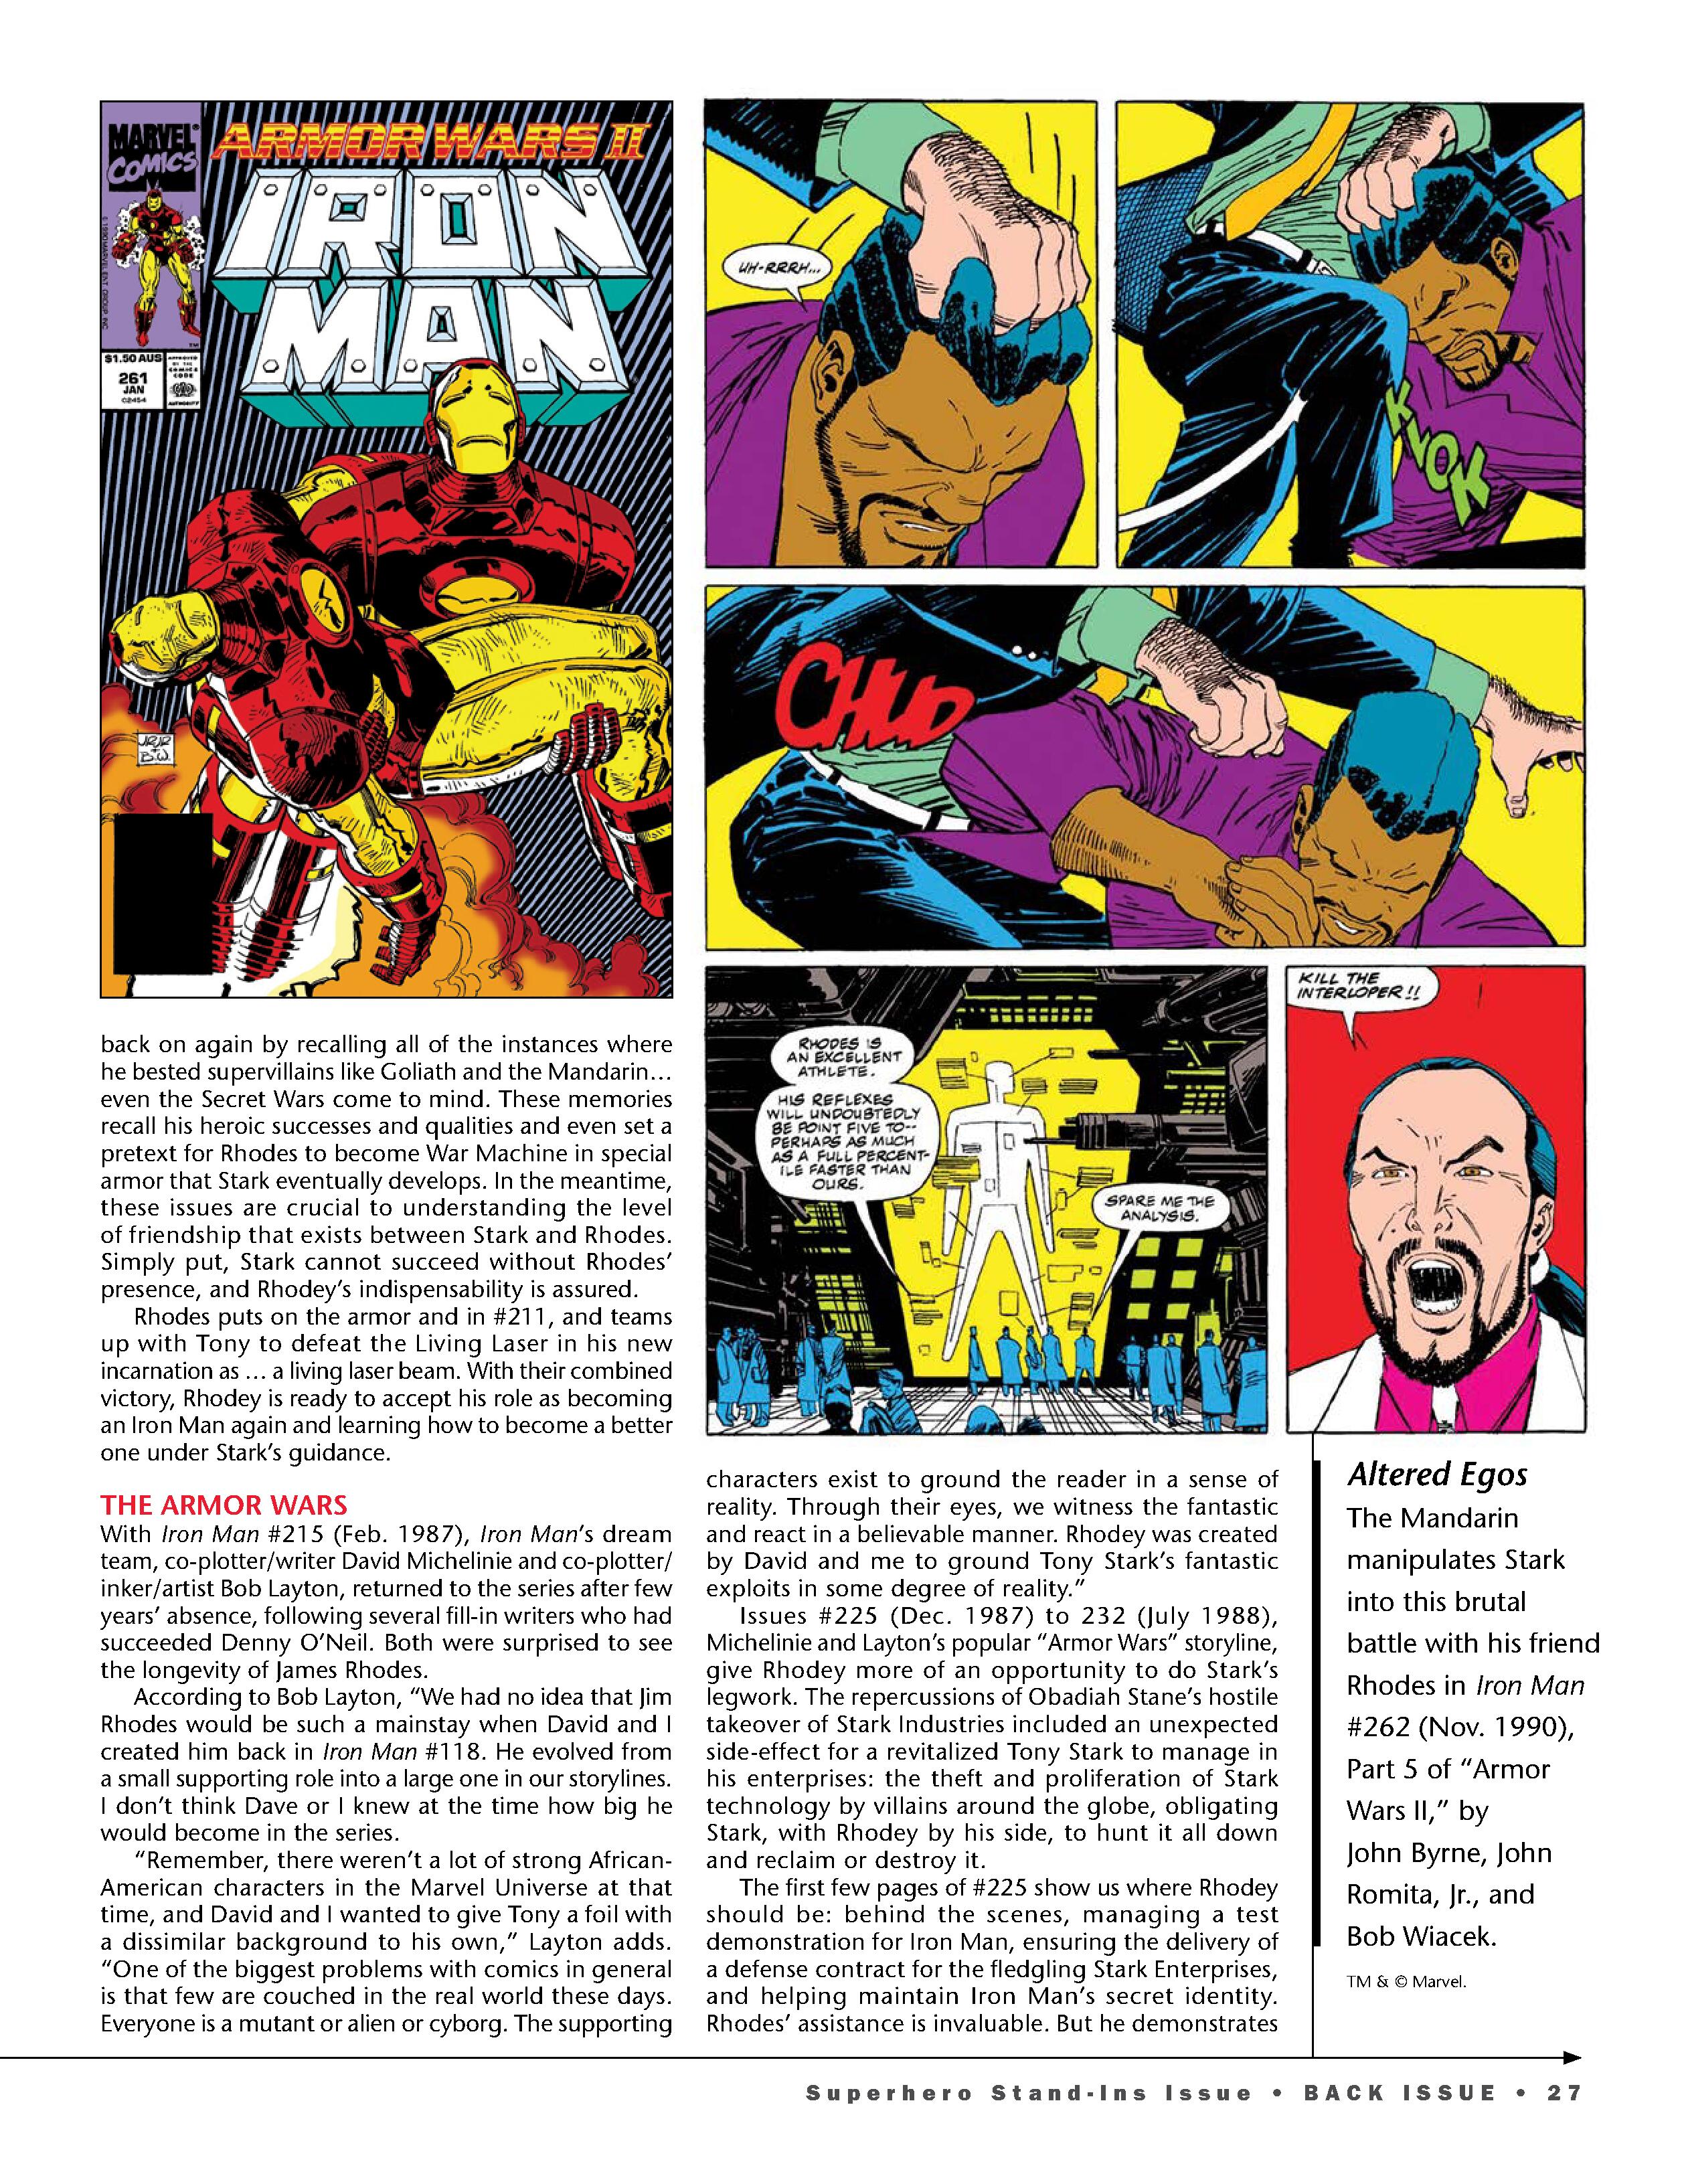 Read online Back Issue comic -  Issue #117 - 29